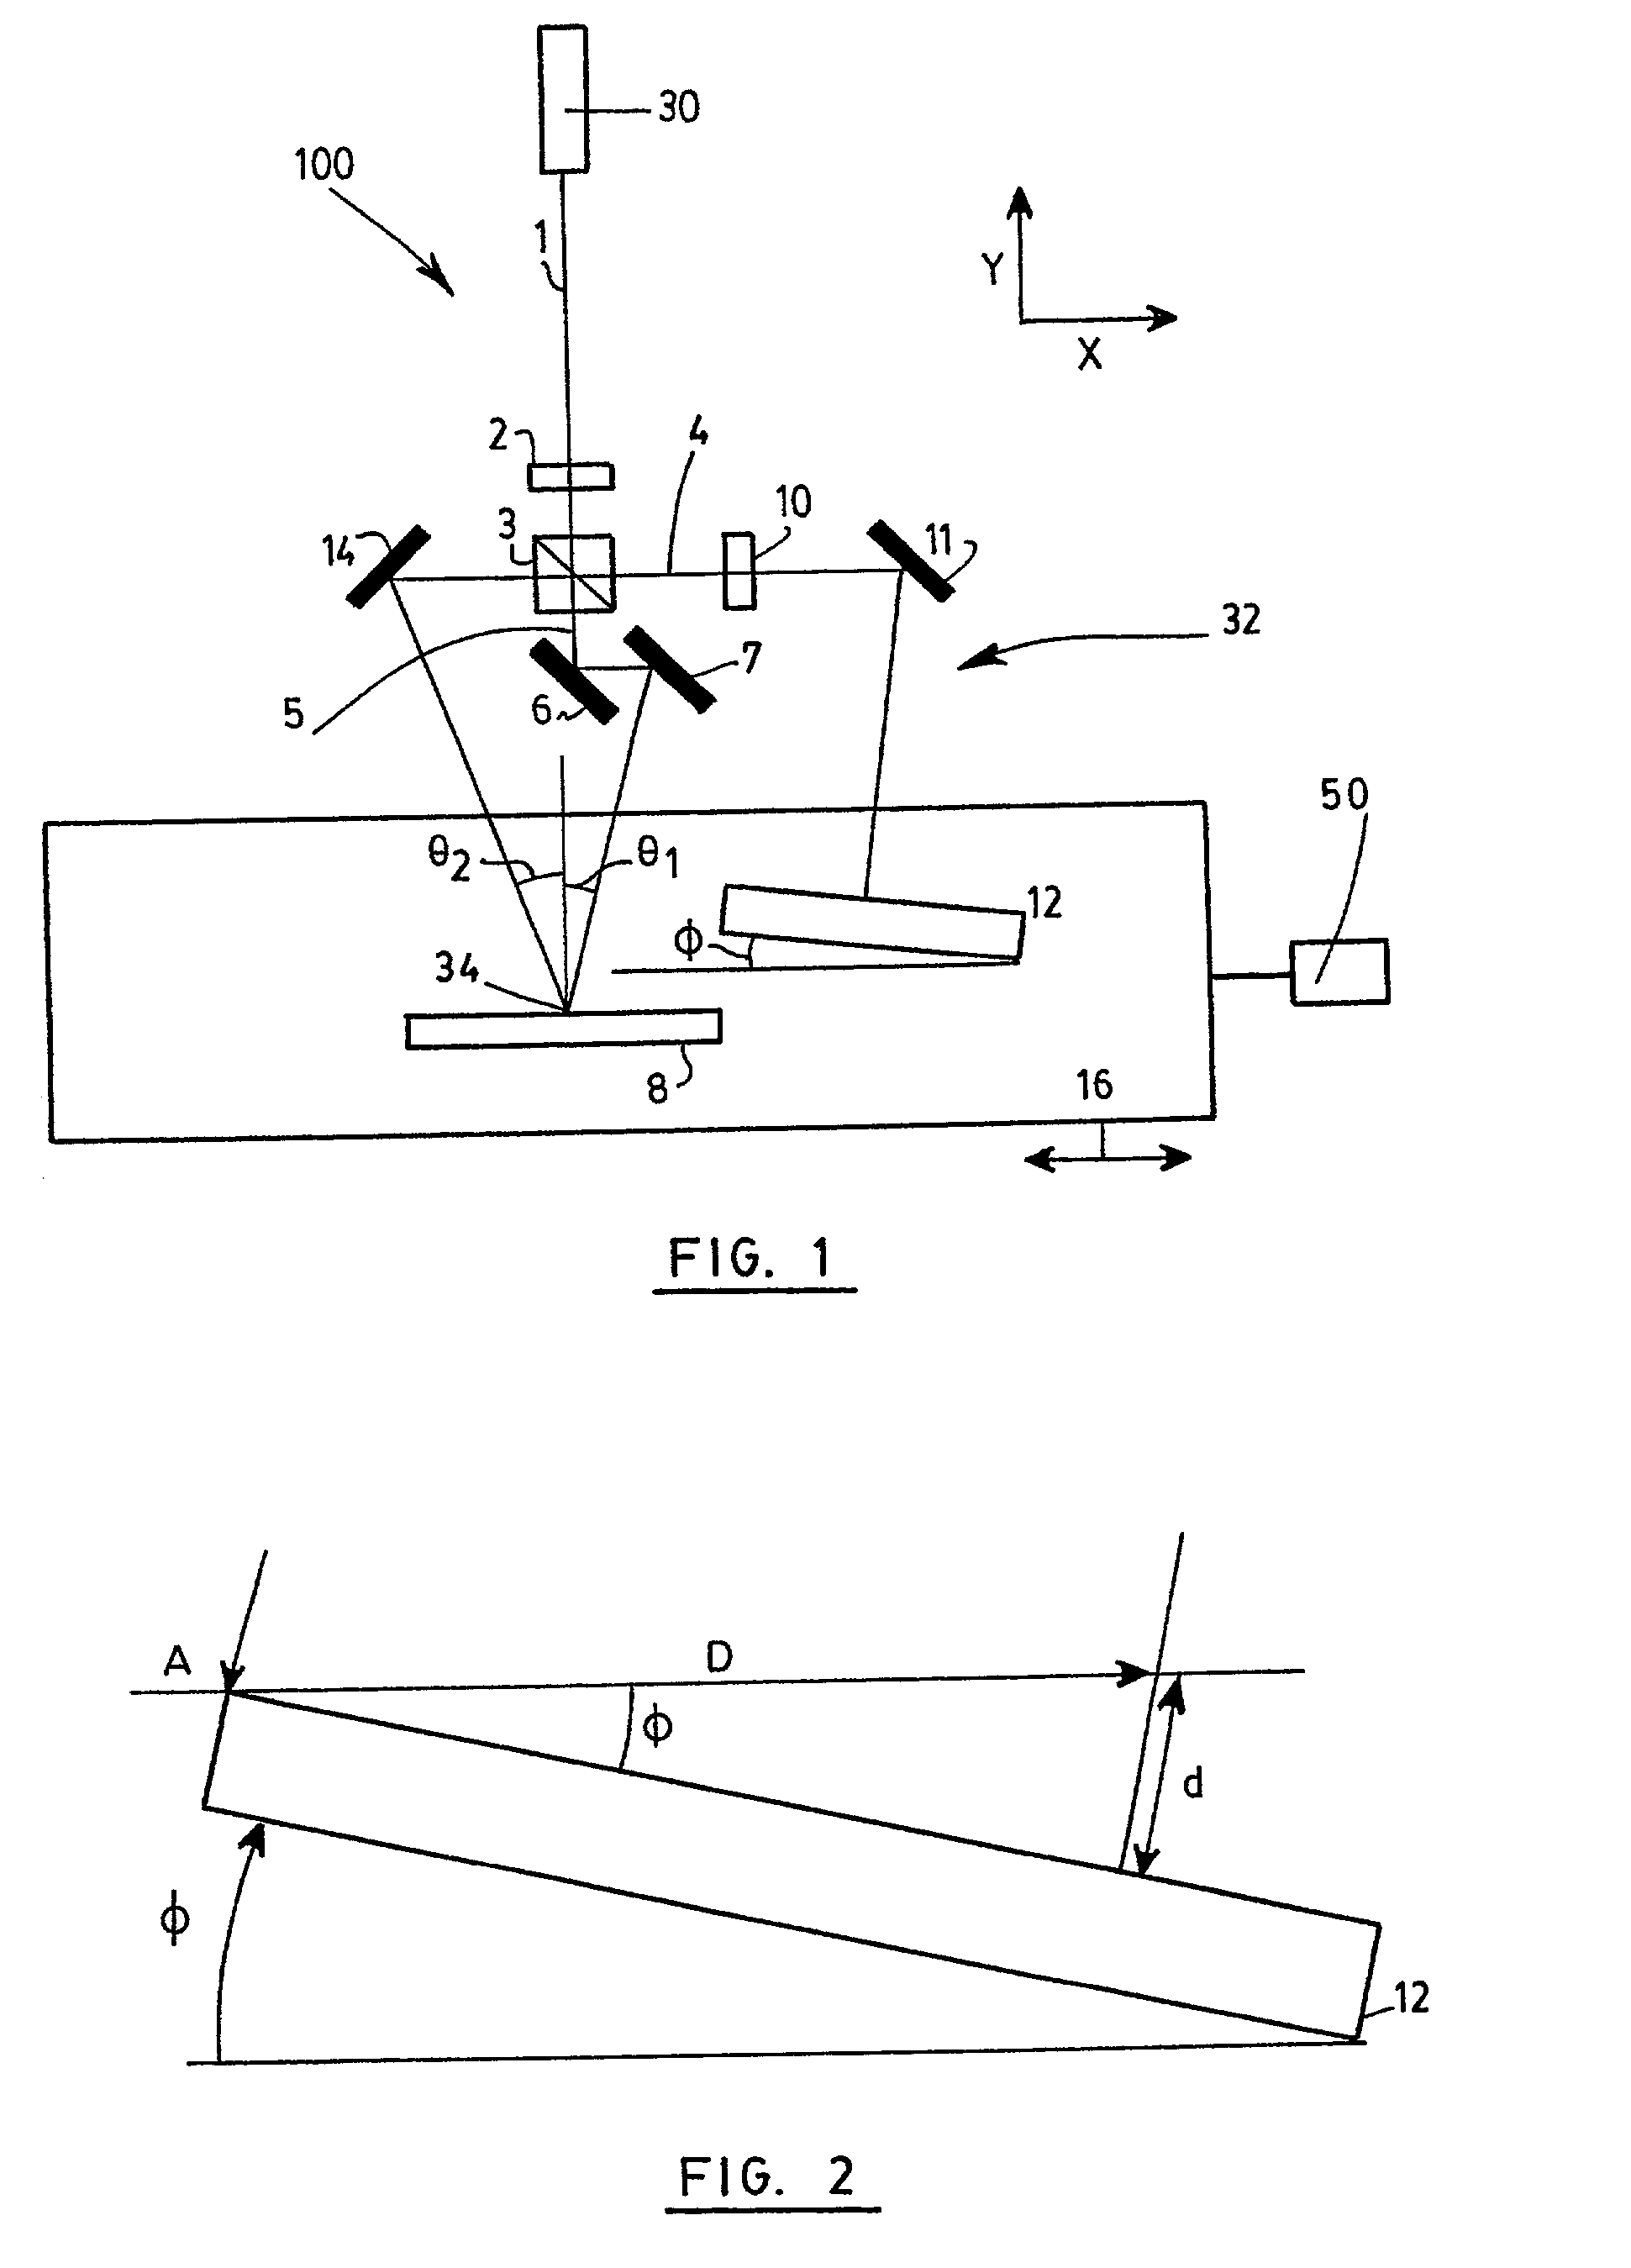 System and method for recording interference fringes in a photosensitive medium